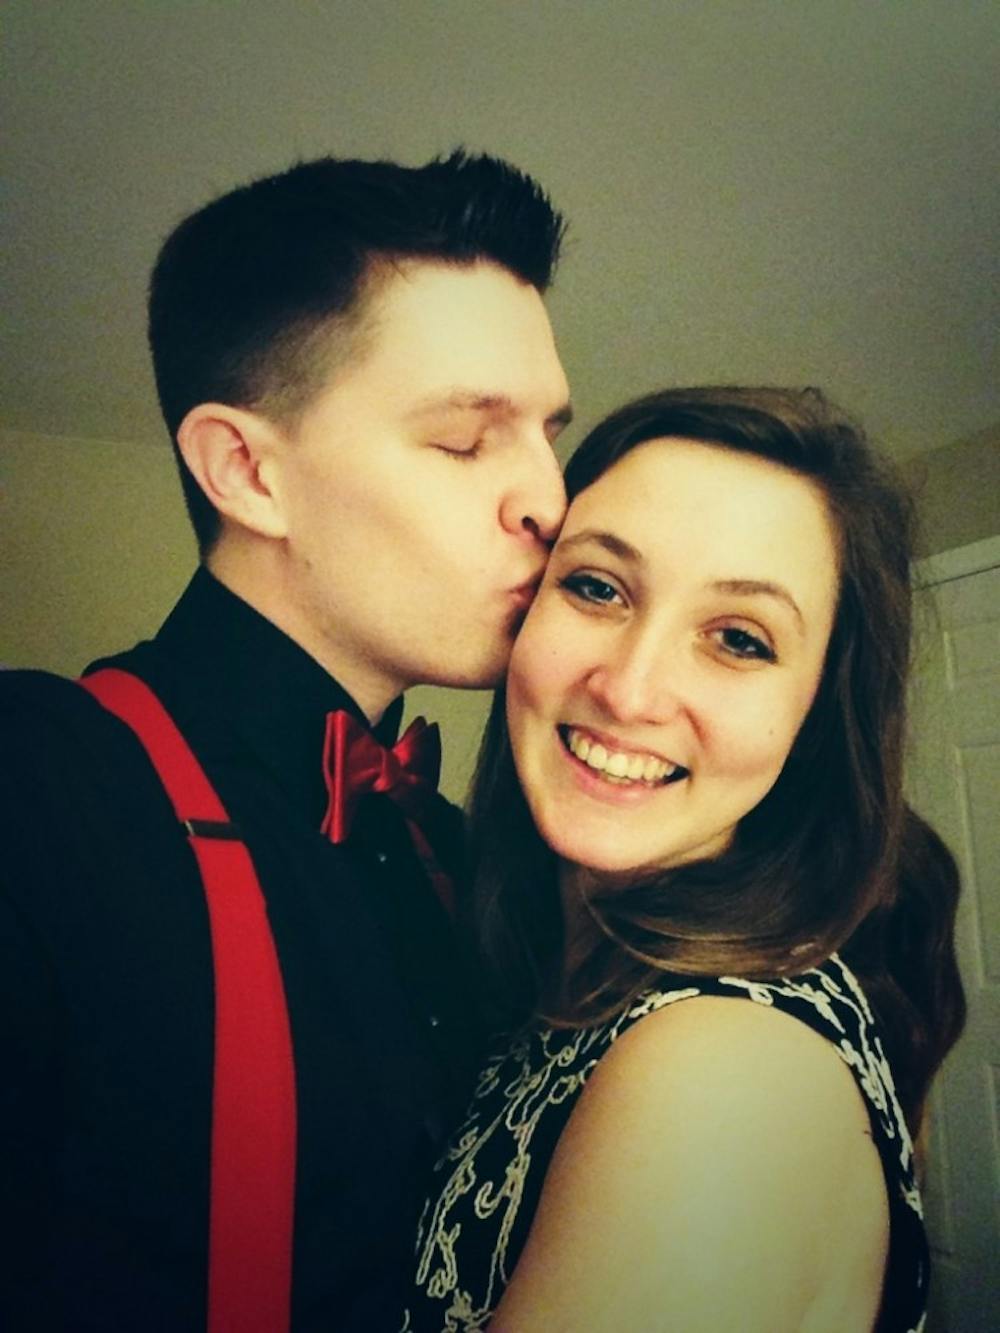 	<p>Abbey Beville, a sophomore psychology major, and her fiance Nick Dupeire were engaged on Dec. 31, 2012. While Beville attends Ball State, Dupeire currently attends the school at the State University of New York. . <span class="caps">PHOTO</span> <span class="caps">PROVIDED</span> <span class="caps">ABBEY</span> <span class="caps">BEVILLE</span></p>